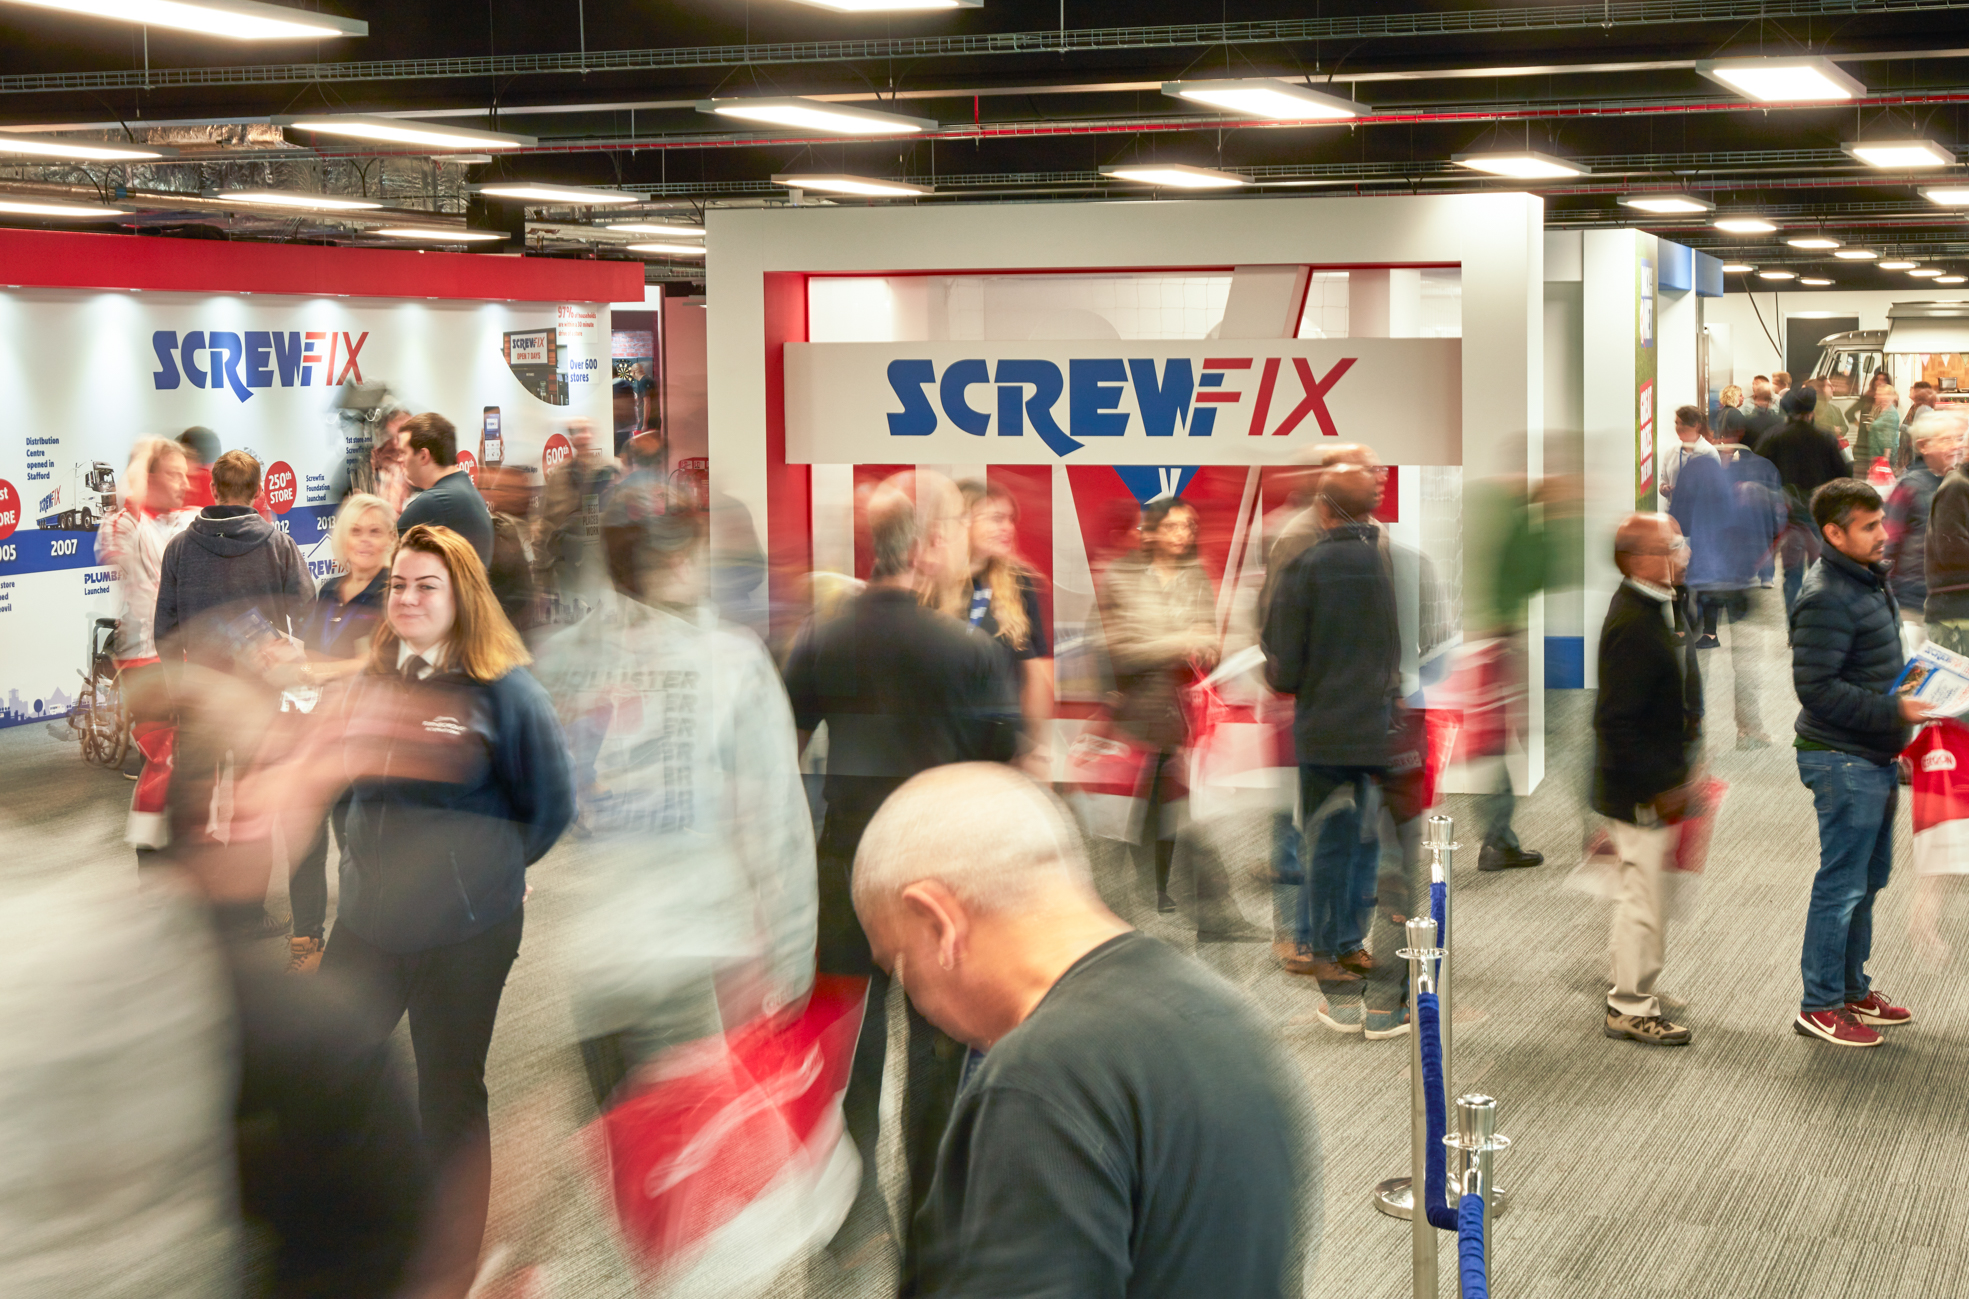 Screwfix LIVE 2018 Attracts Record Crowds